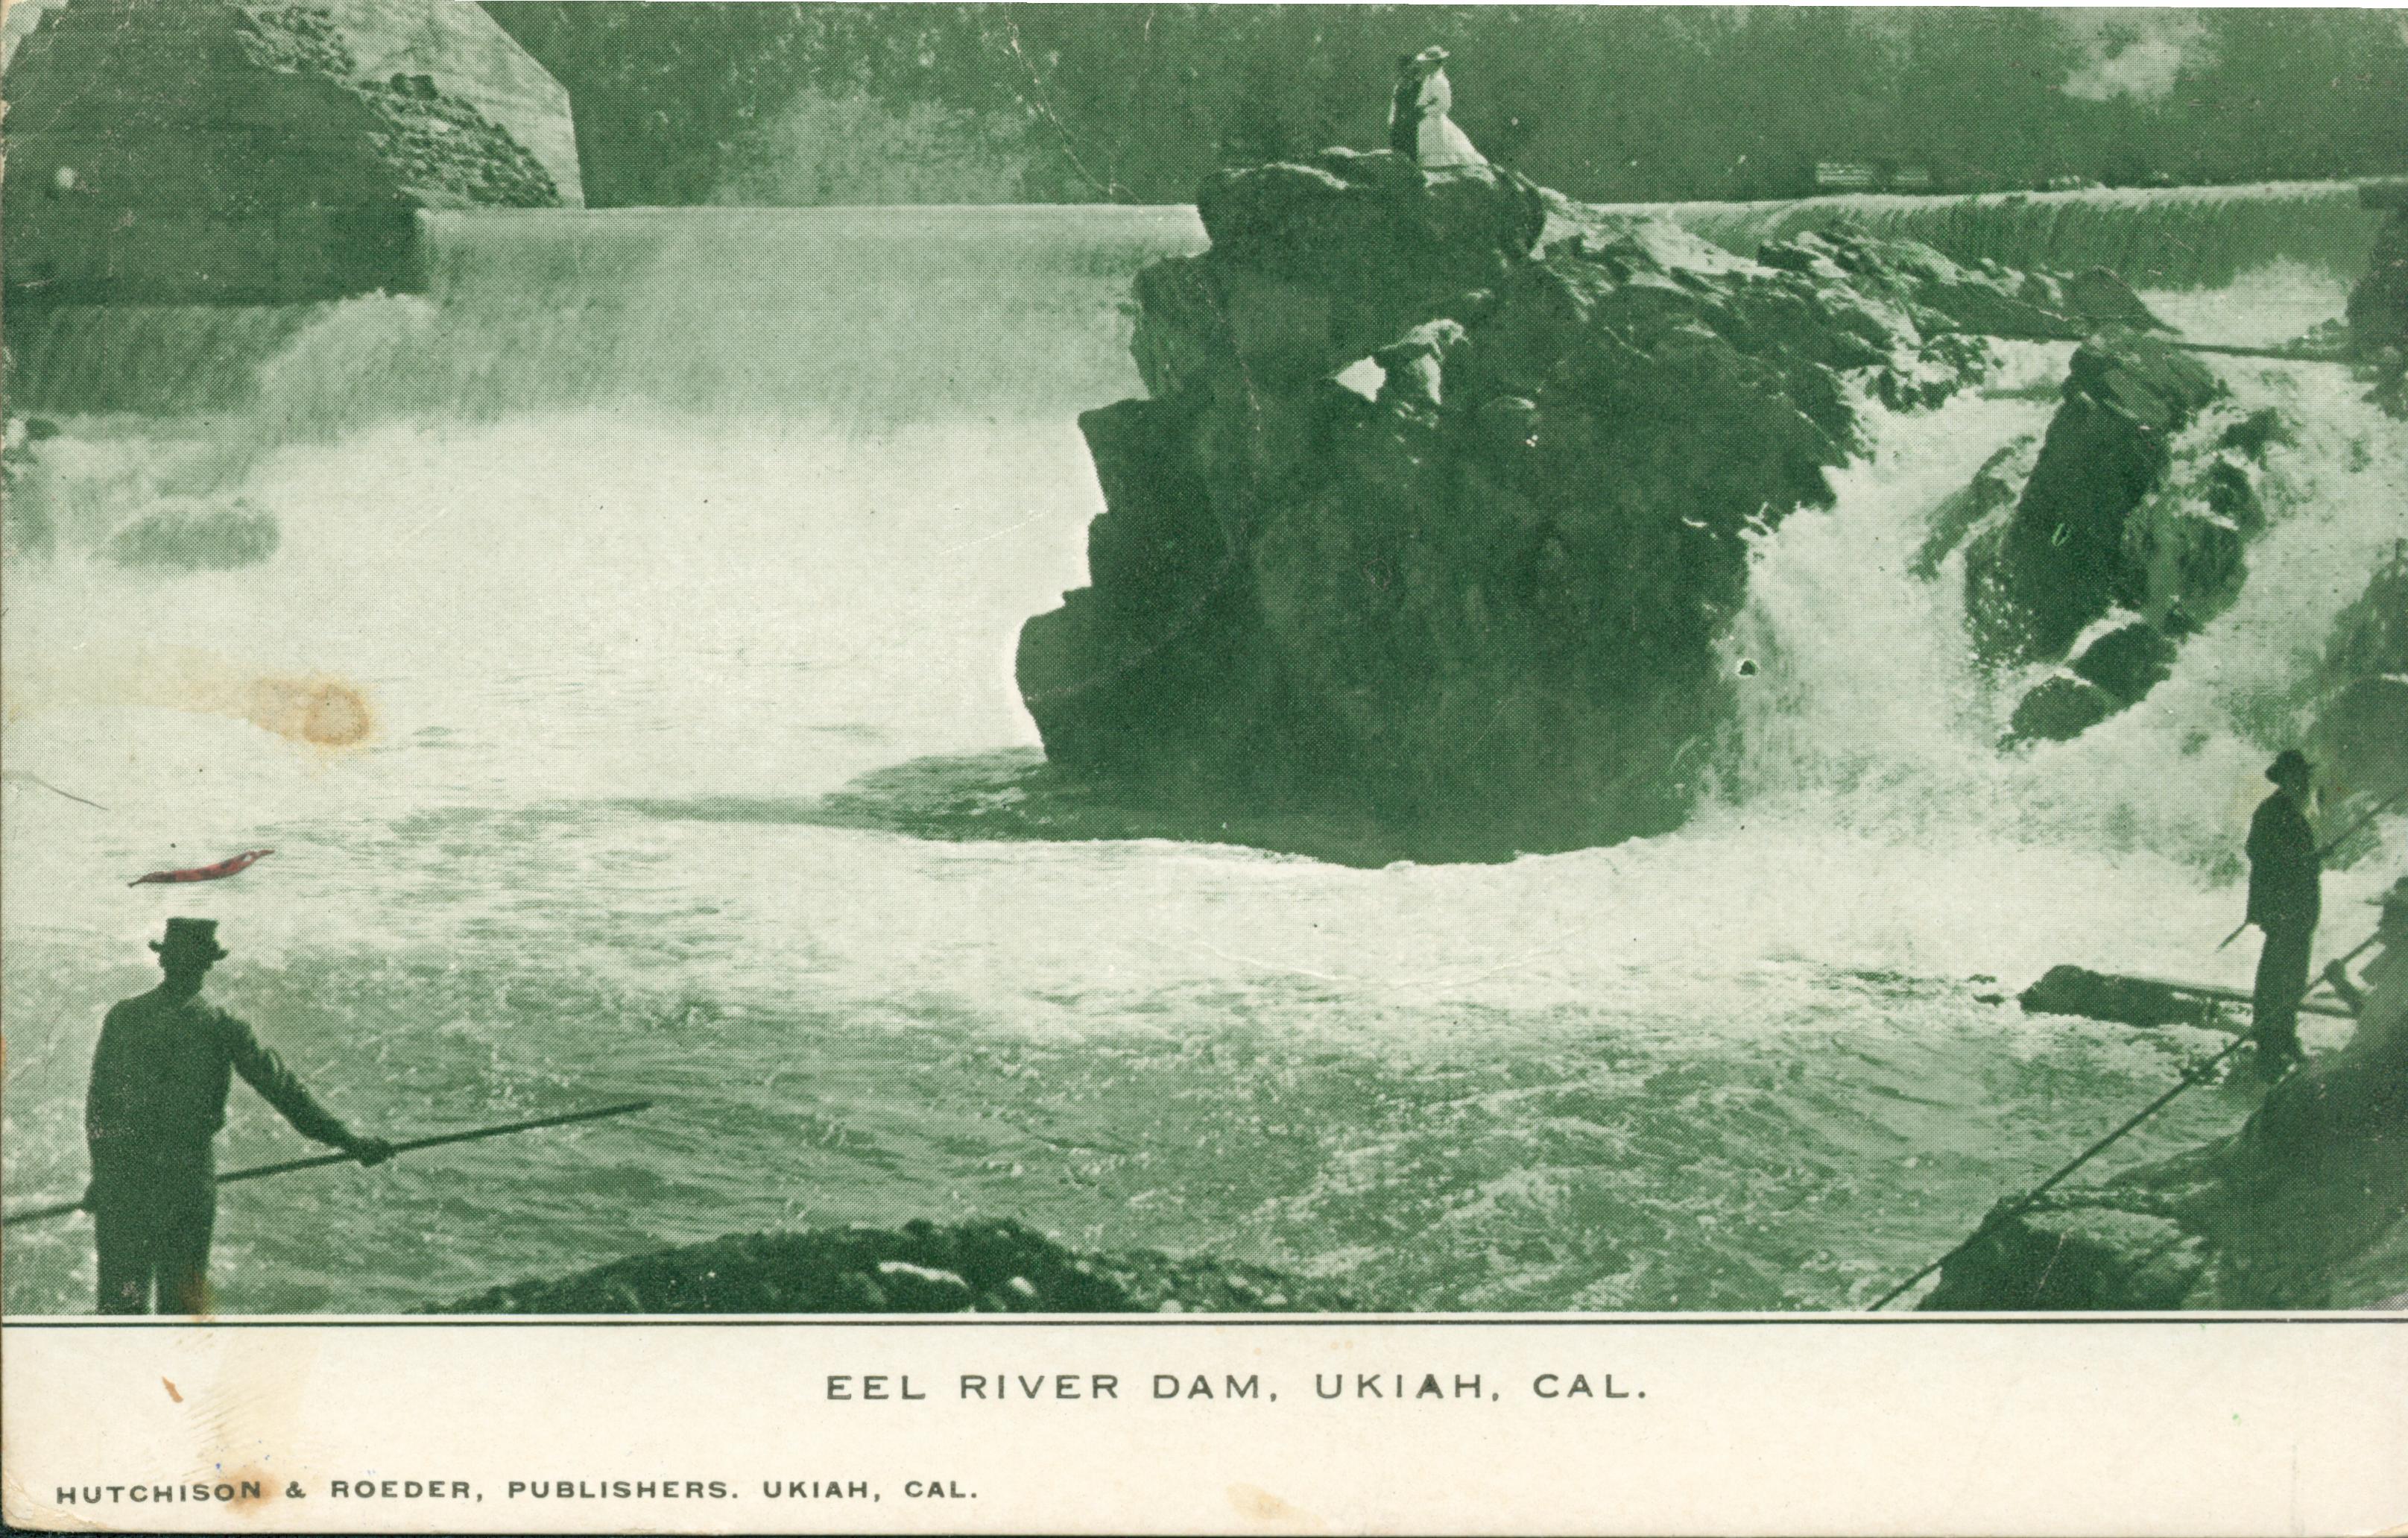 Men spear fishing in the Eel River in Ukiah, waterfalls in background, couple standing on large rock formation in middle of river